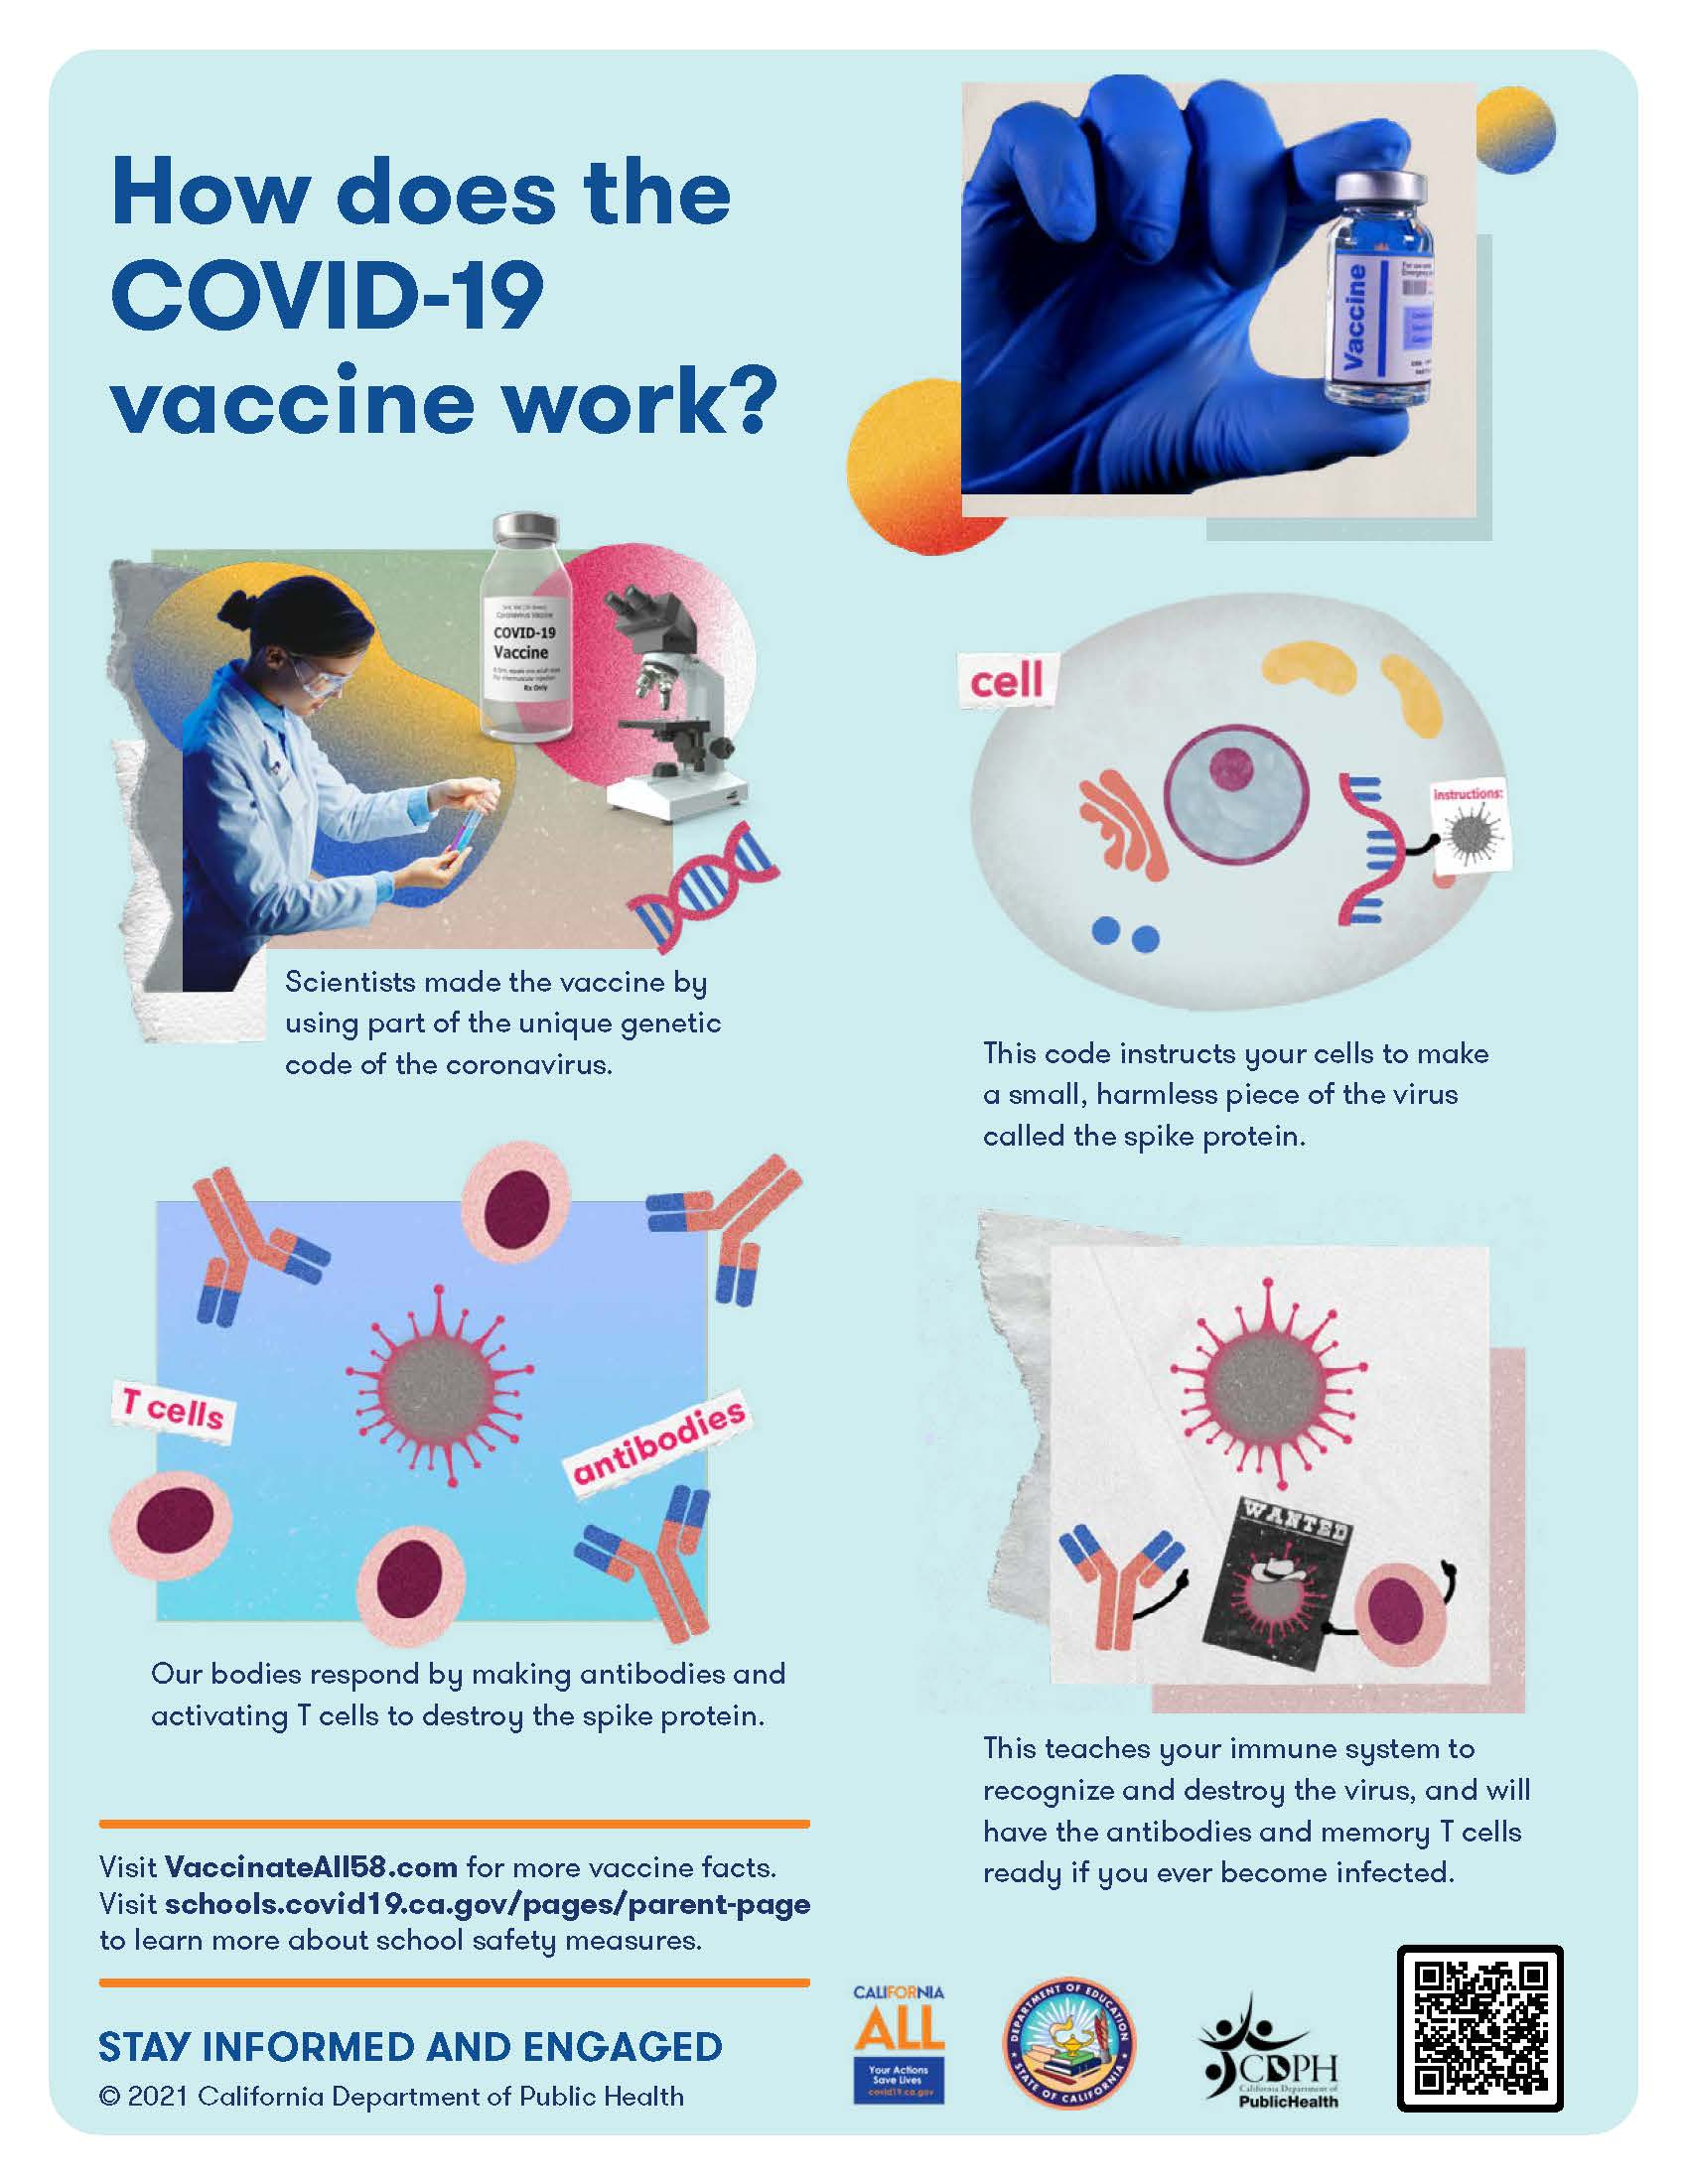 How does the COVID-19 vaccine work